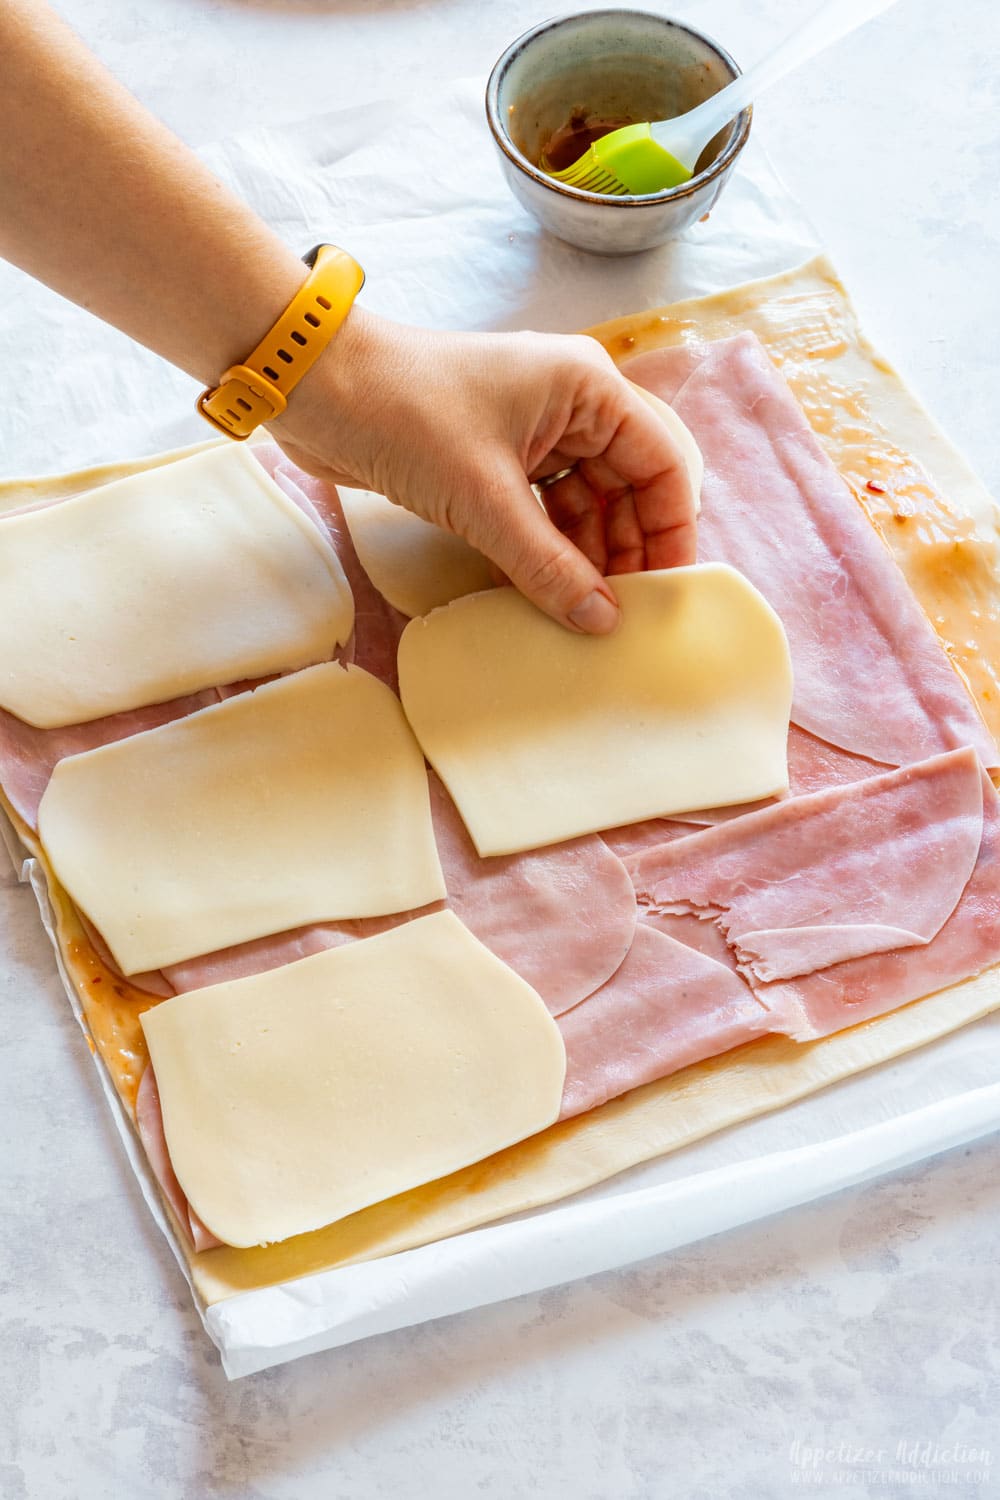 Showing how to make pinwheels with ham and cheese.